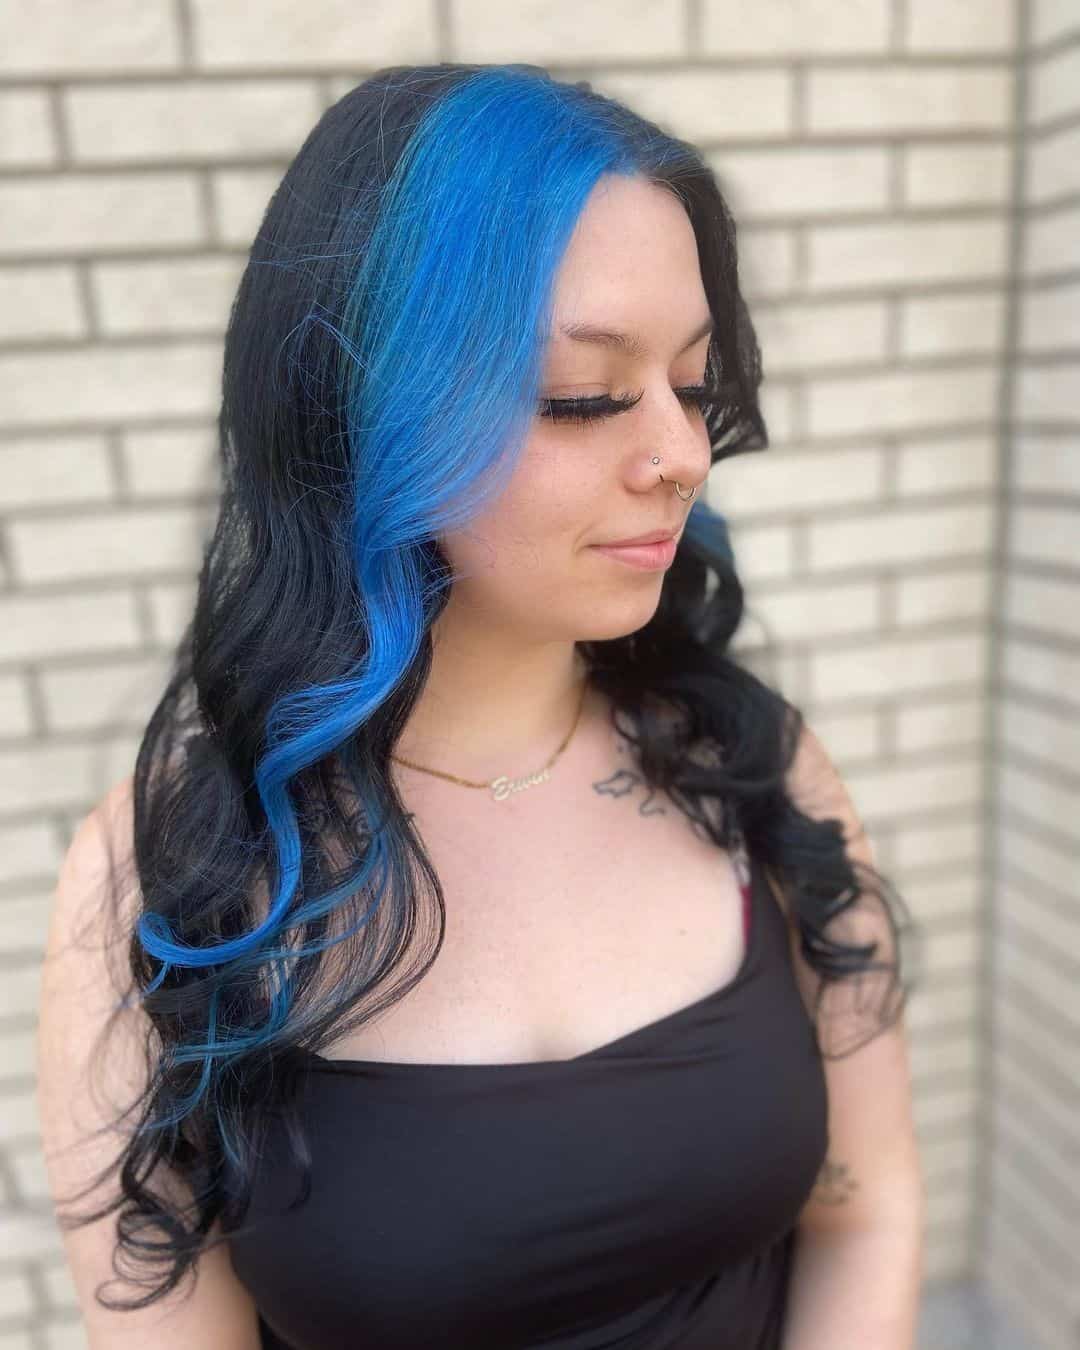 Black Hair With Blue Highlights At Front 